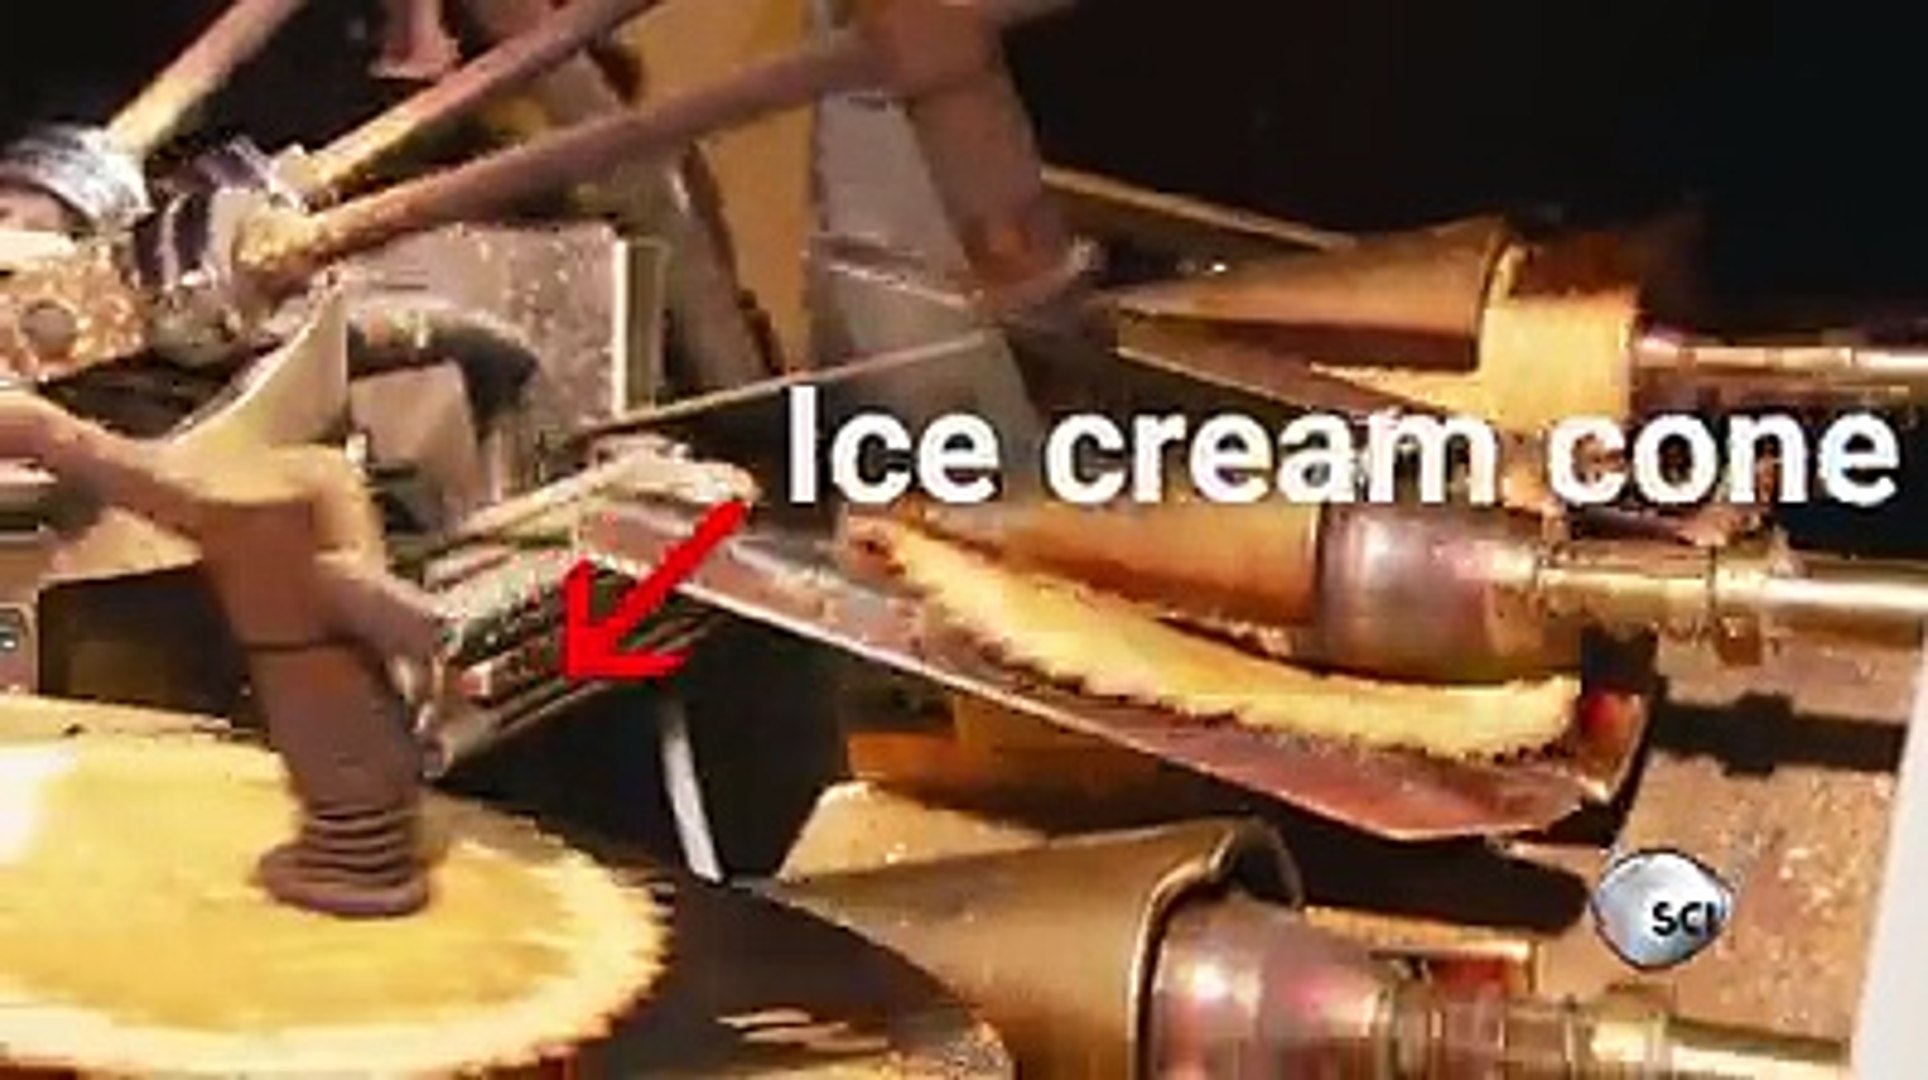 This is how Ice Cream Cones are Made.